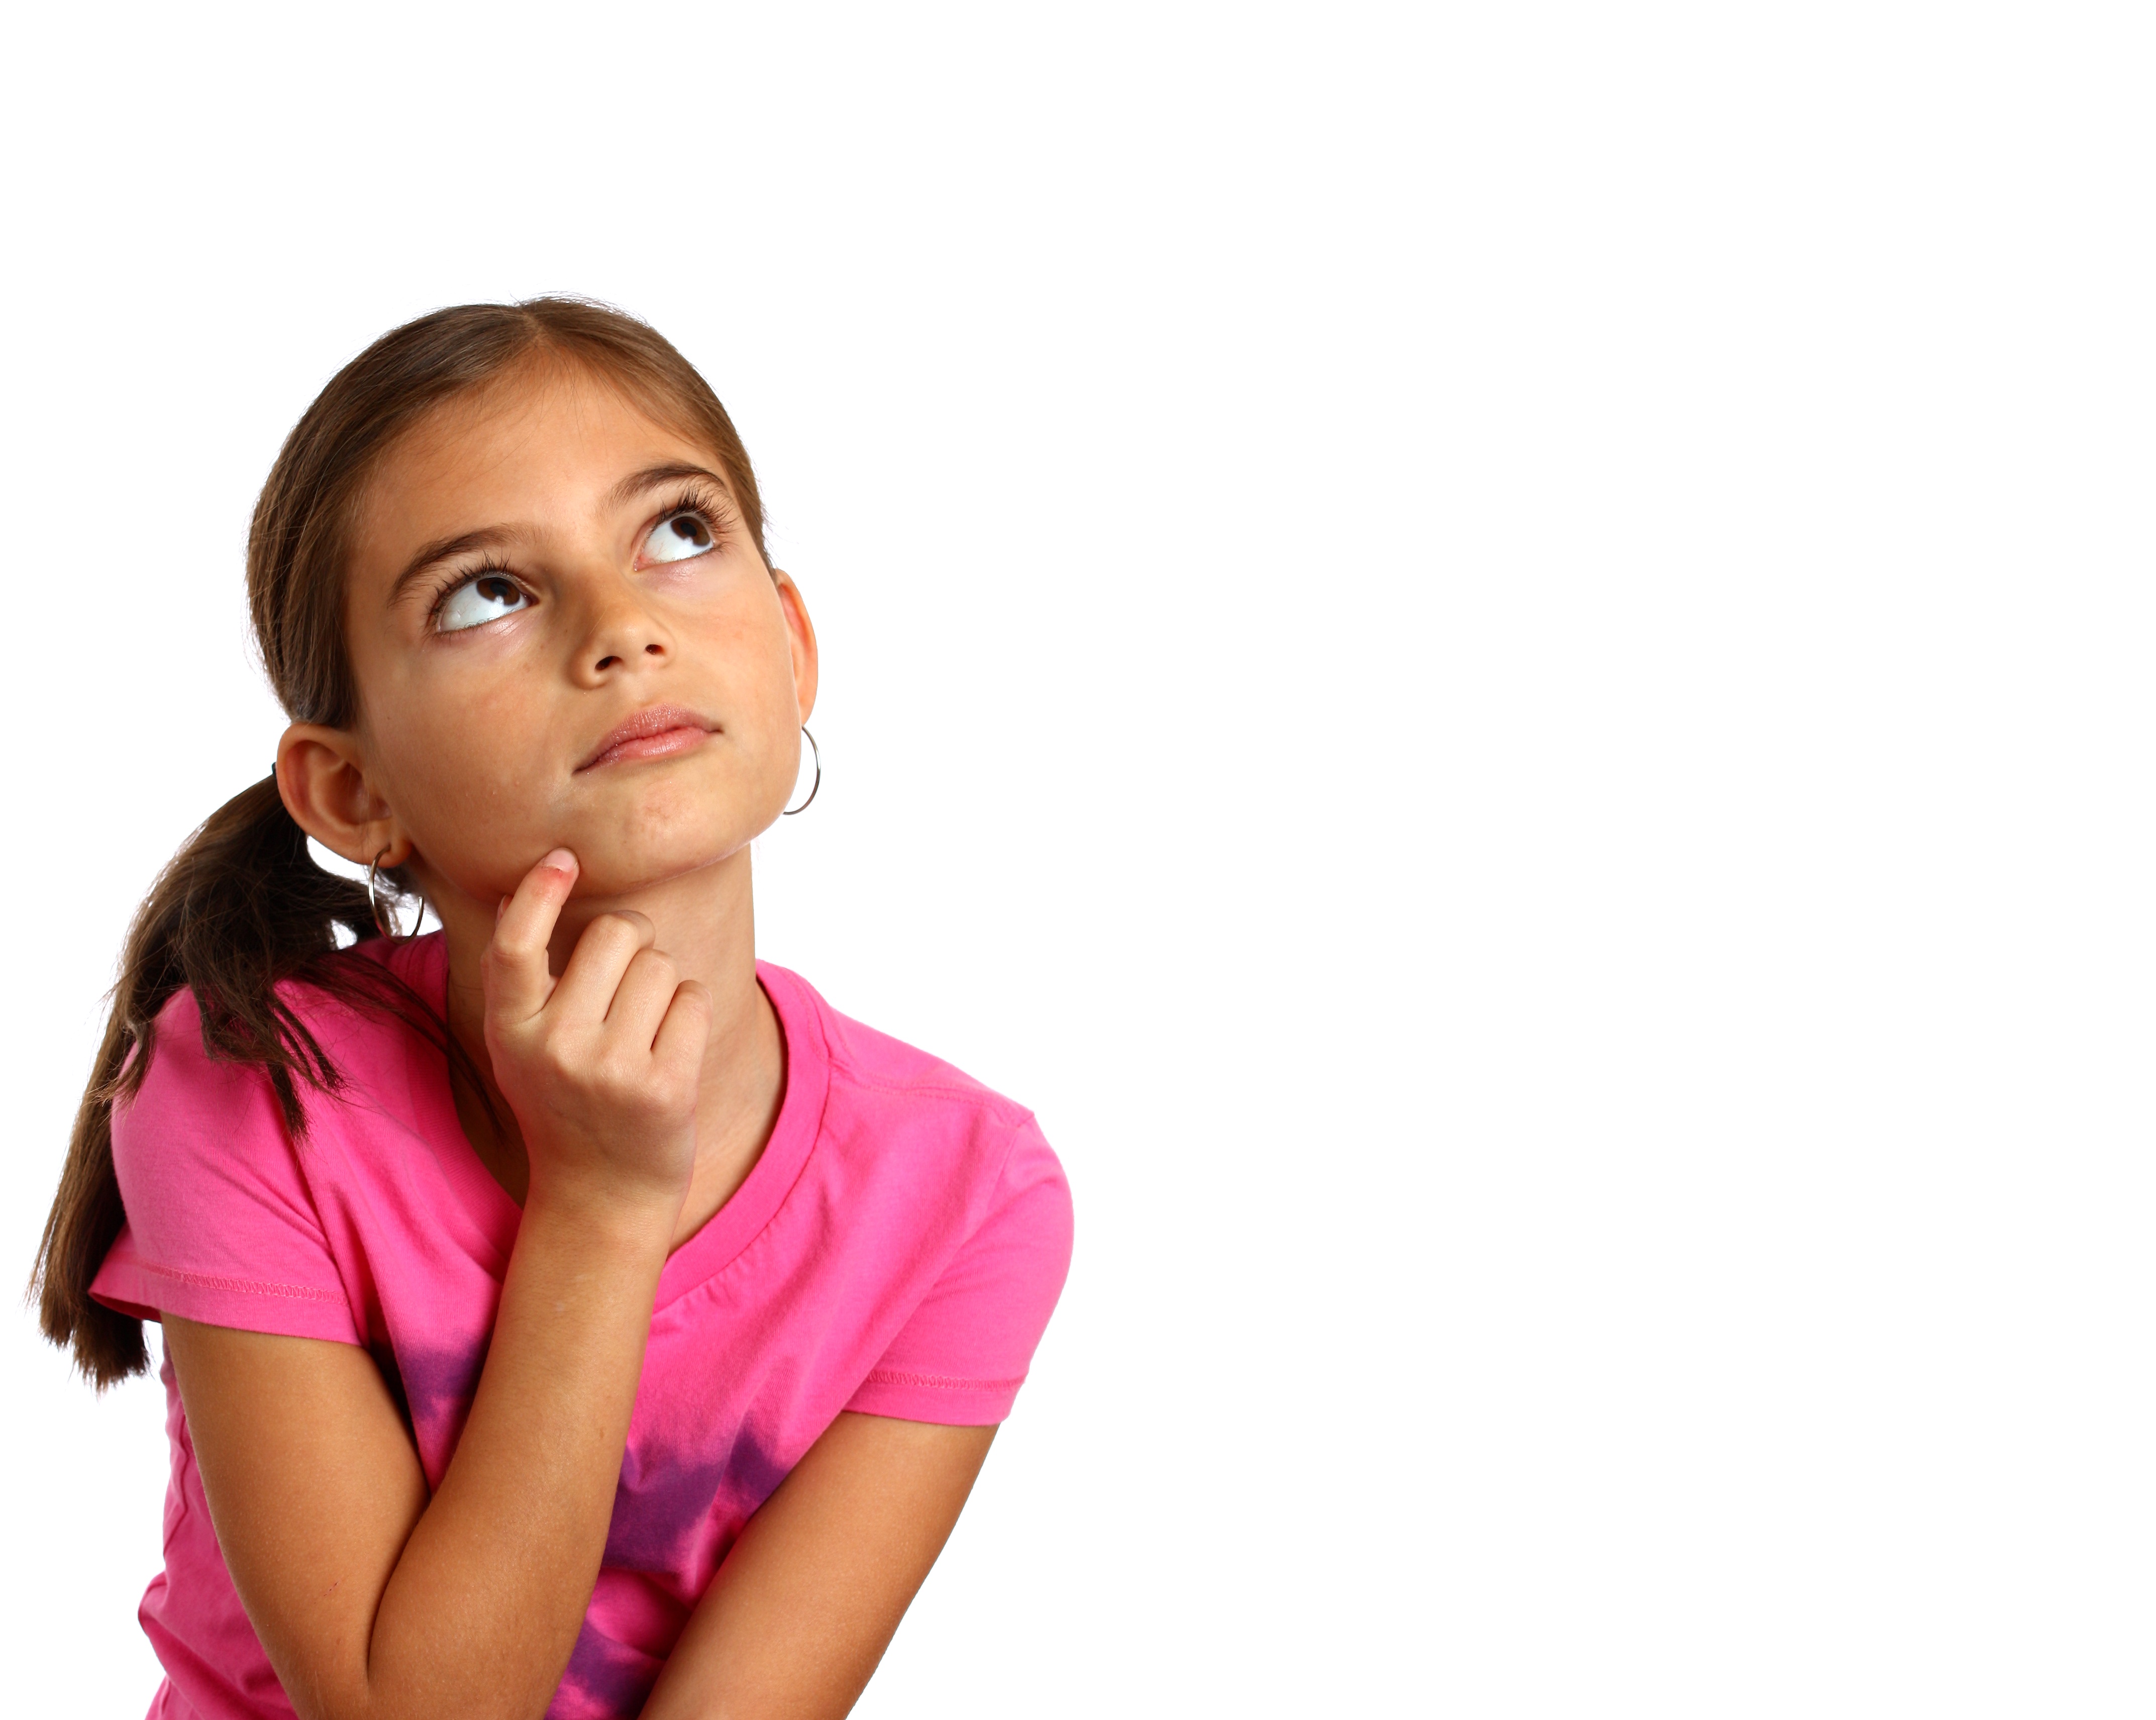 Young girl with a thoughtful expression photo